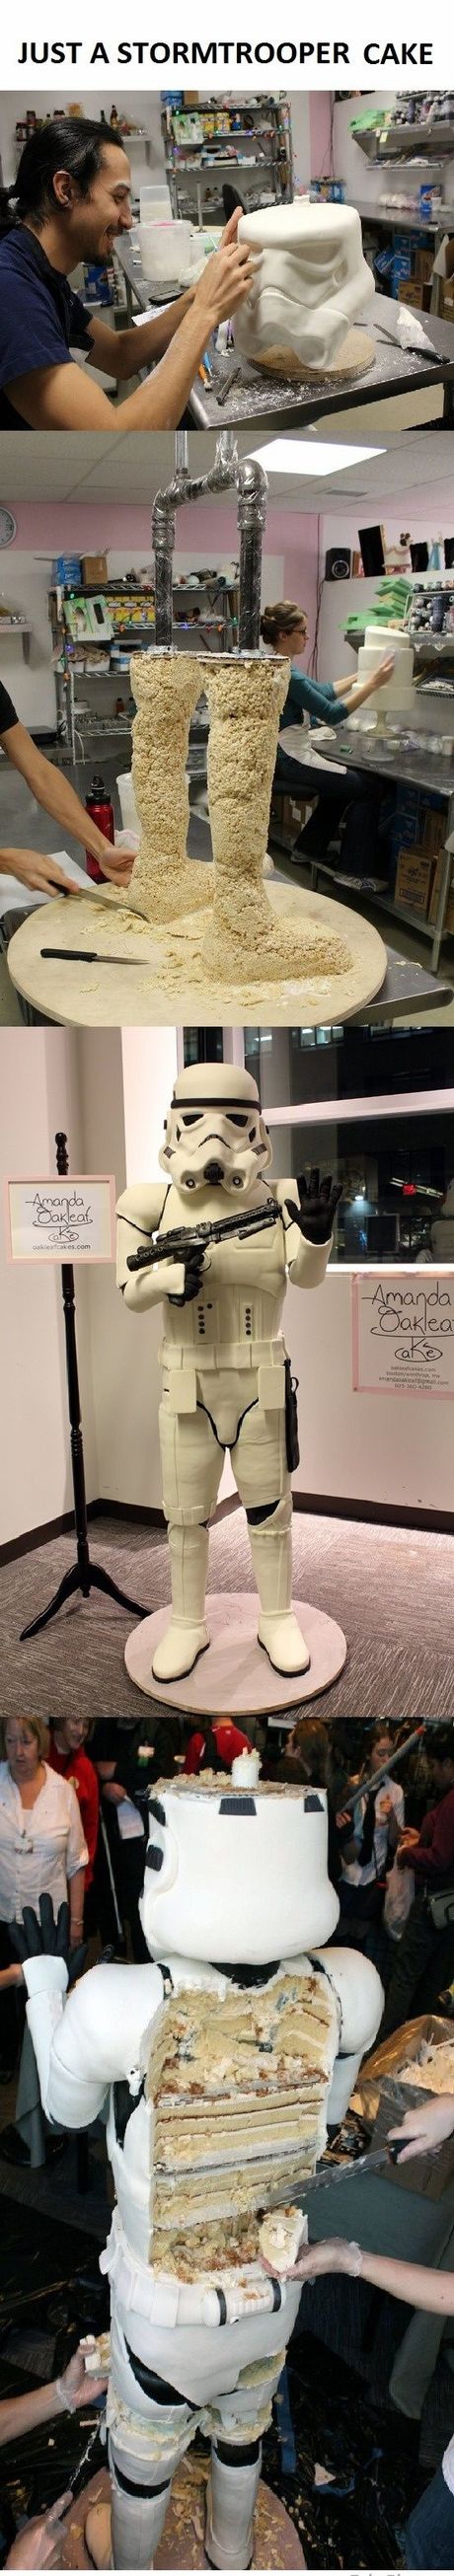 Stormtrooper cake wins the Internets.